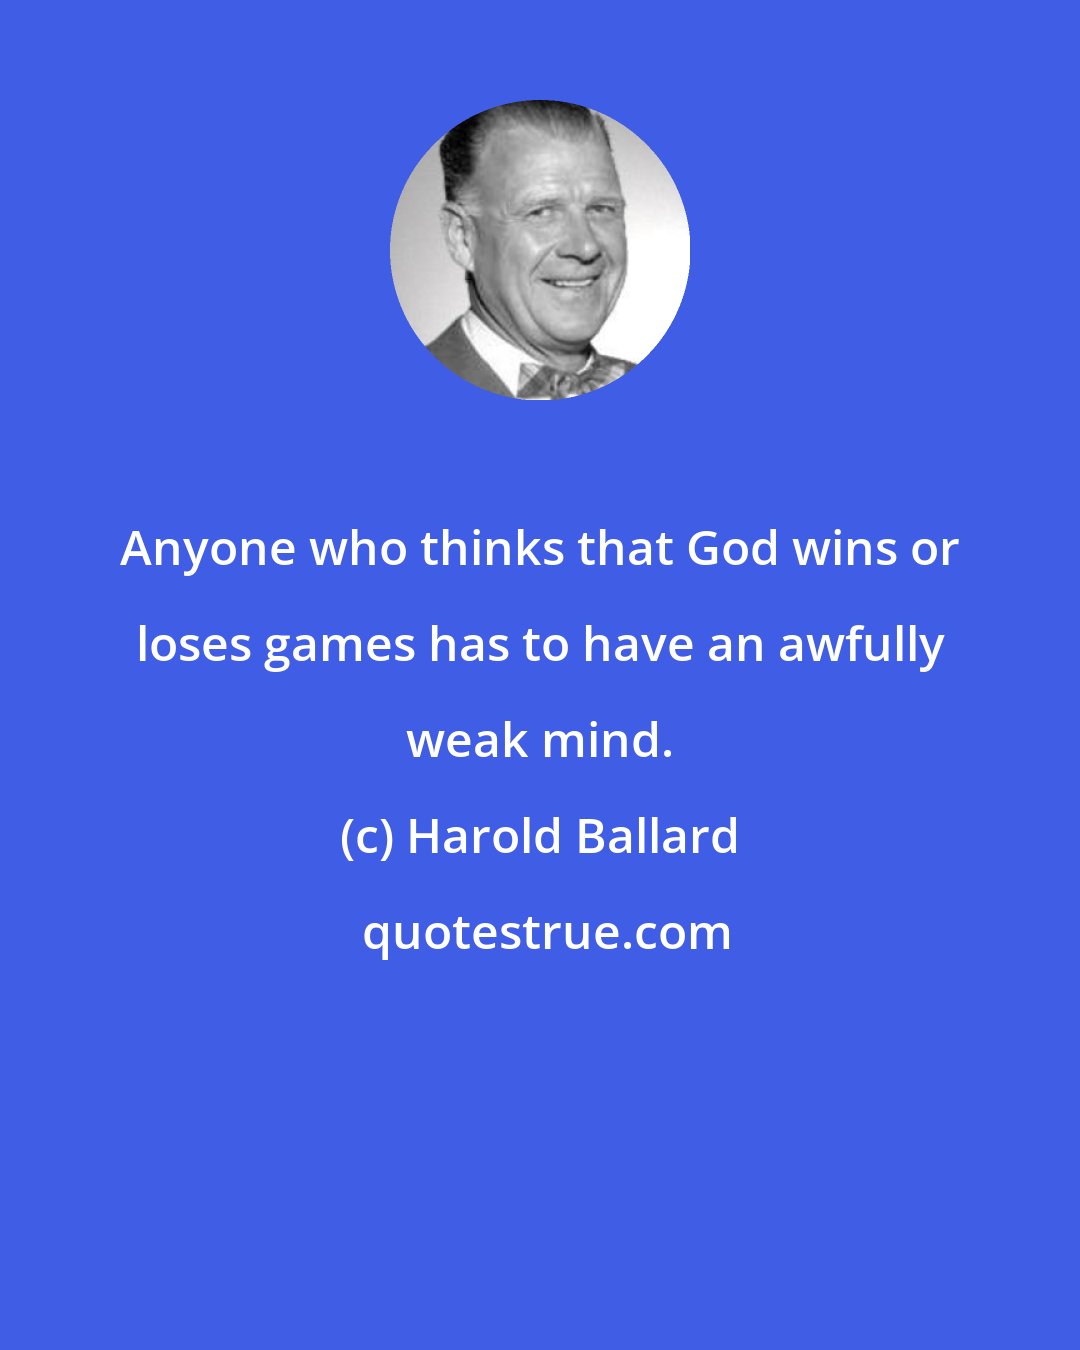 Harold Ballard: Anyone who thinks that God wins or loses games has to have an awfully weak mind.